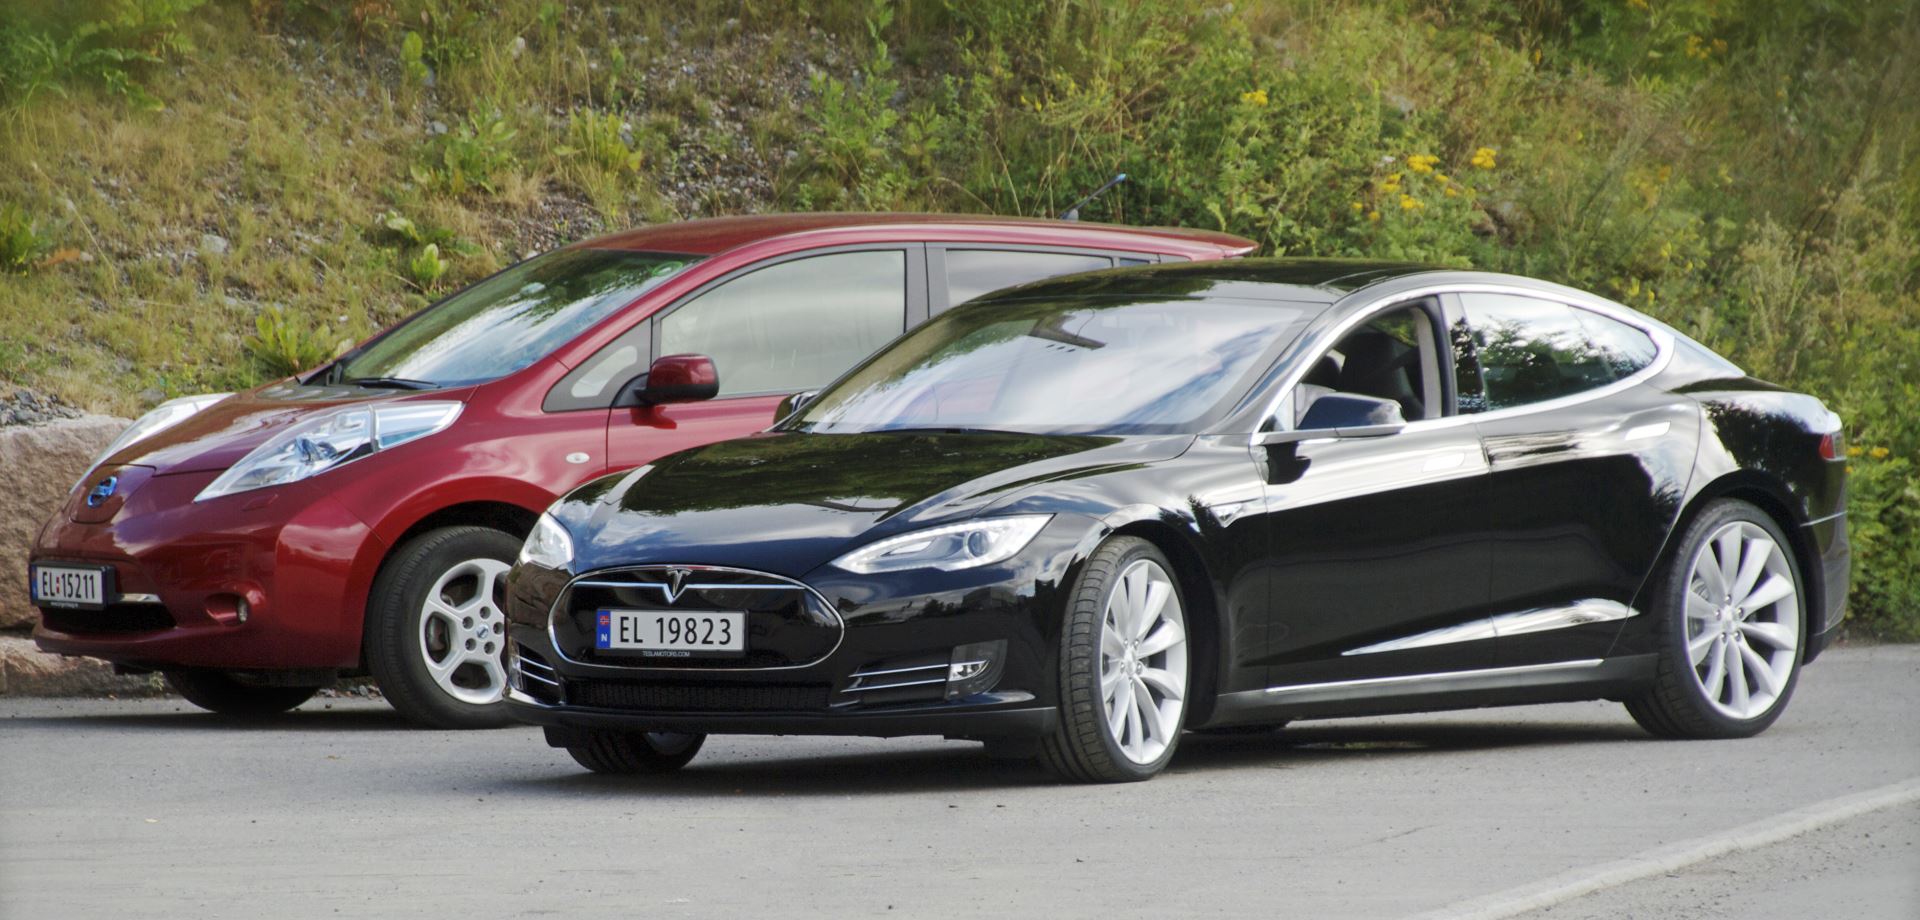 Norsk Elbilforening - This file was derived from Nissan Leaf and Tesla Model S in Norway.jpg: Tesla Model S (front) and Nissan Leaf (back) in Norway